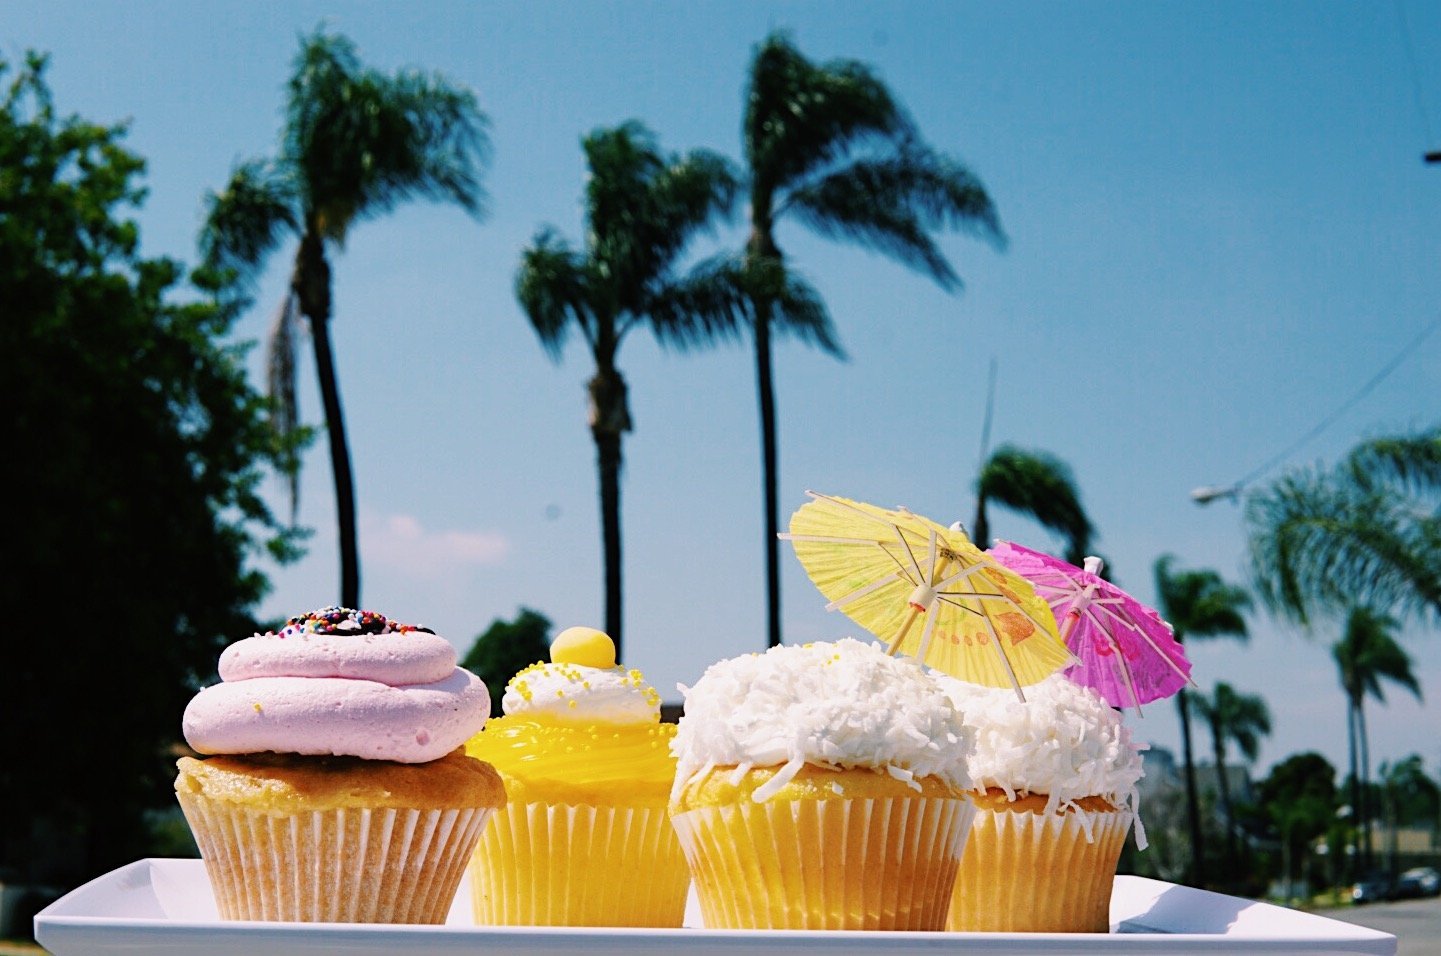 Get Your National Cupcake Lovers Fix with These One of a Kind Creations!